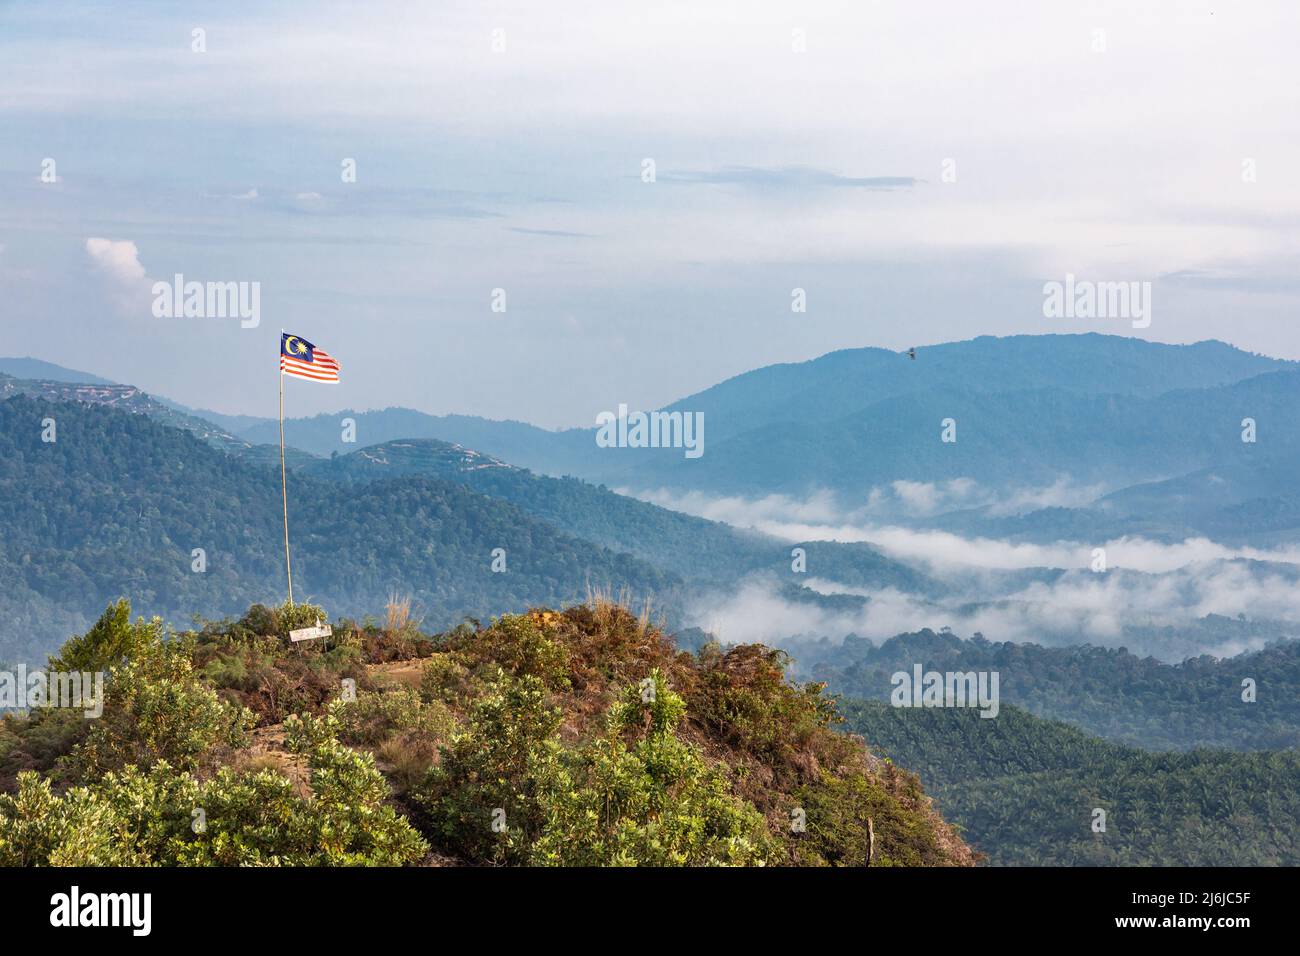 Malaysia flag flying on pole on mountain highland against sea of cloud and blue sky Stock Photo